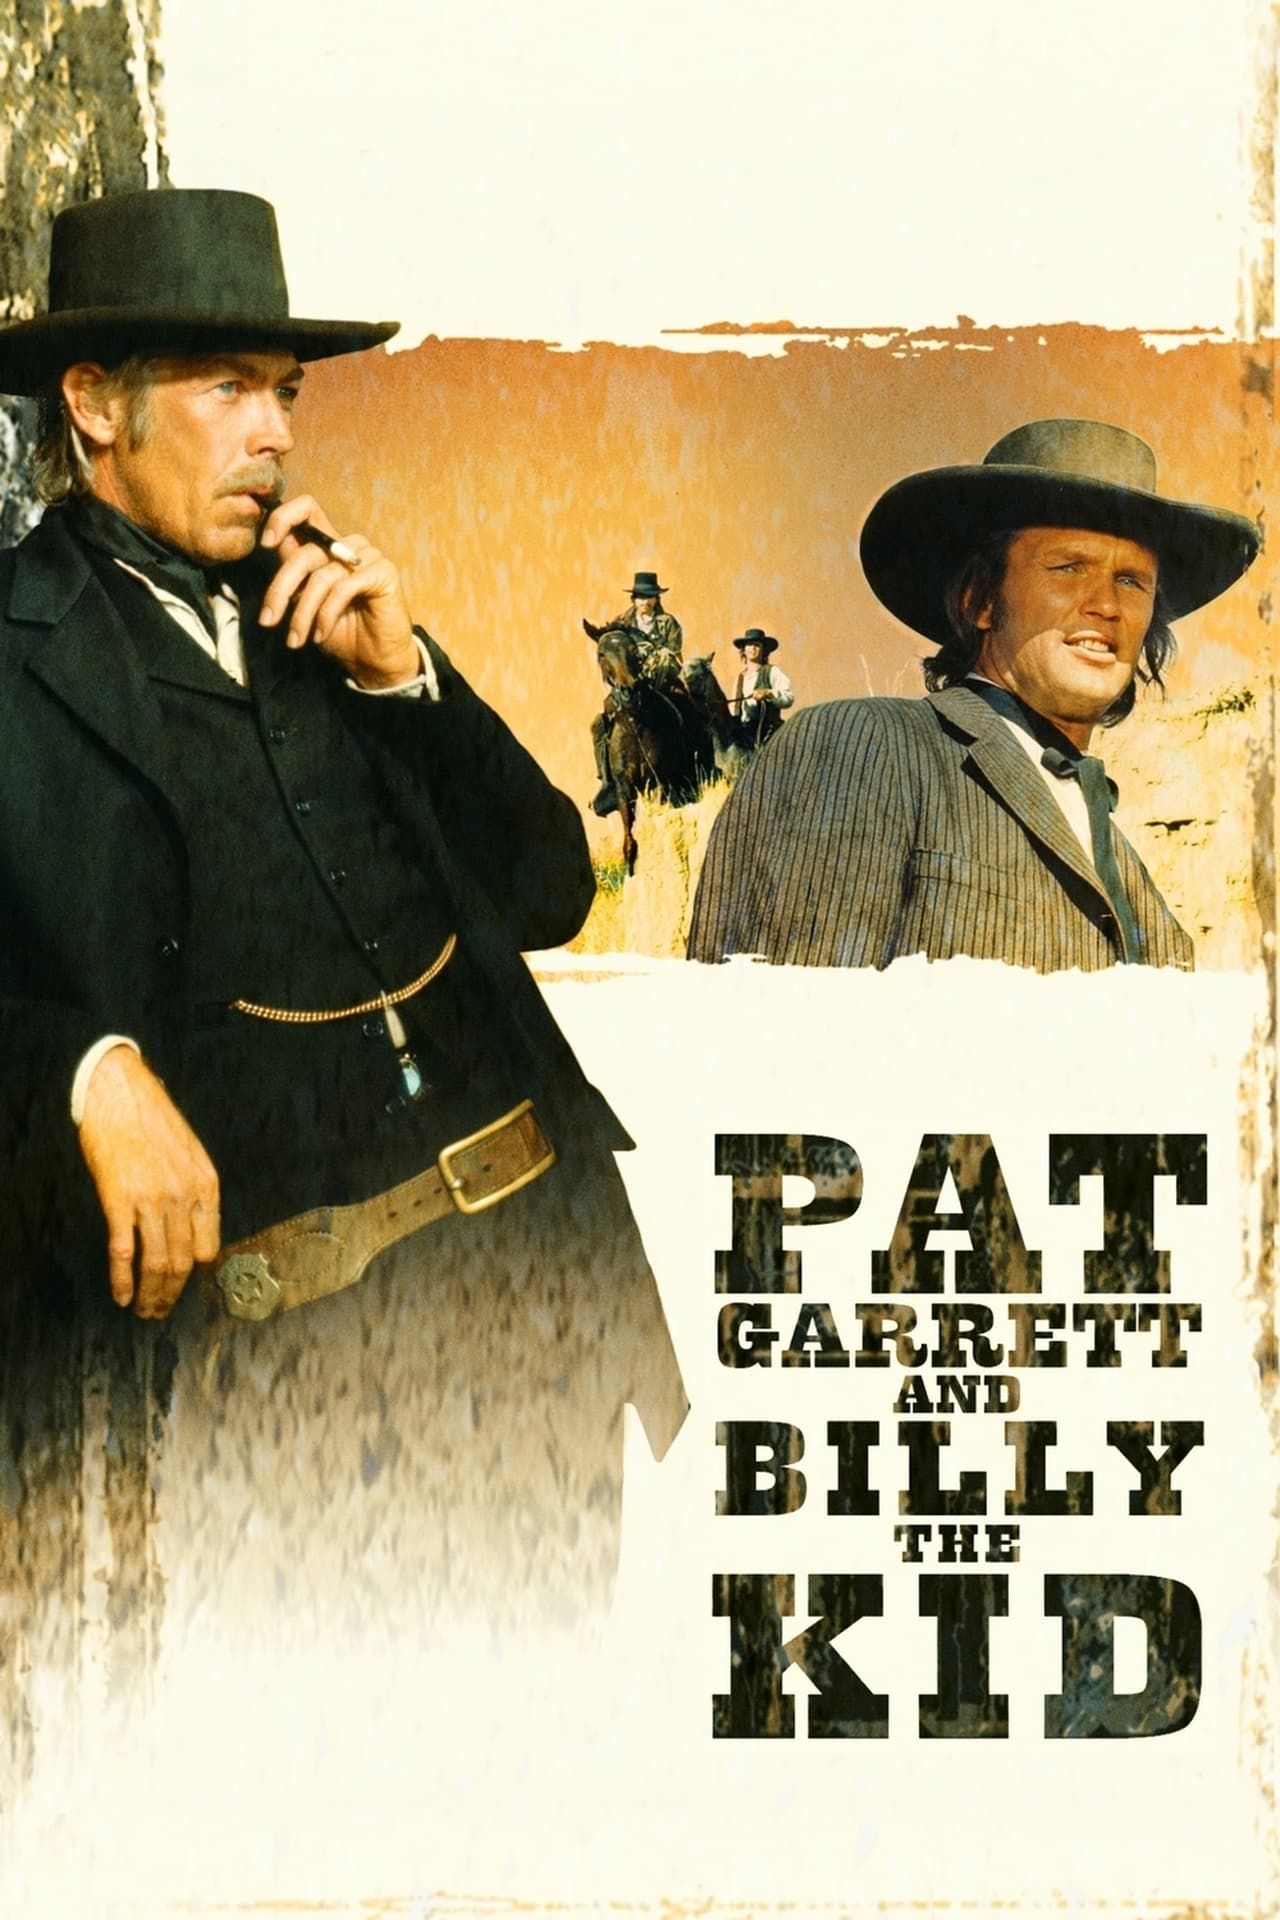 Pat Garrett And Billy The Kid Movie Poster With James Coburn and Richard Jaeckel